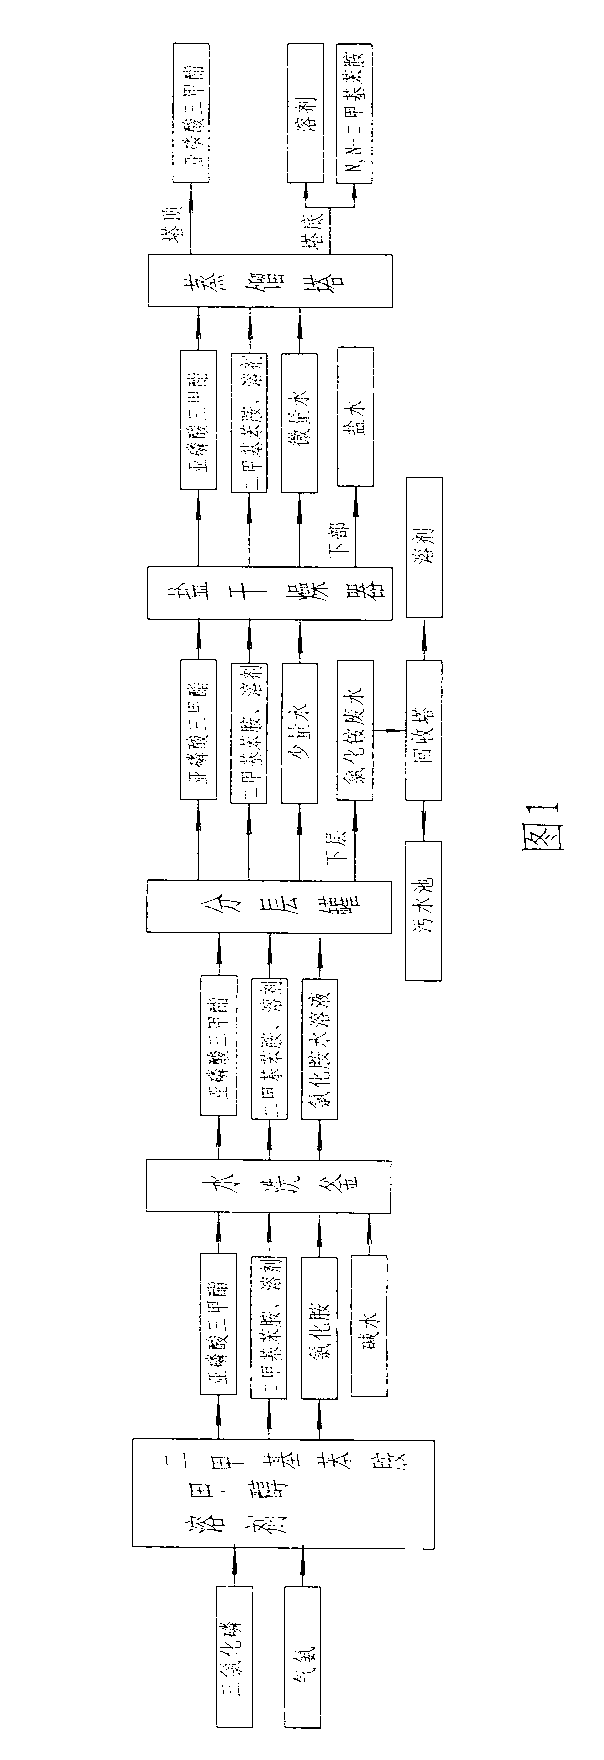 Process for continuously producing trimethyl phosphite by using N, N-dimethylaniline